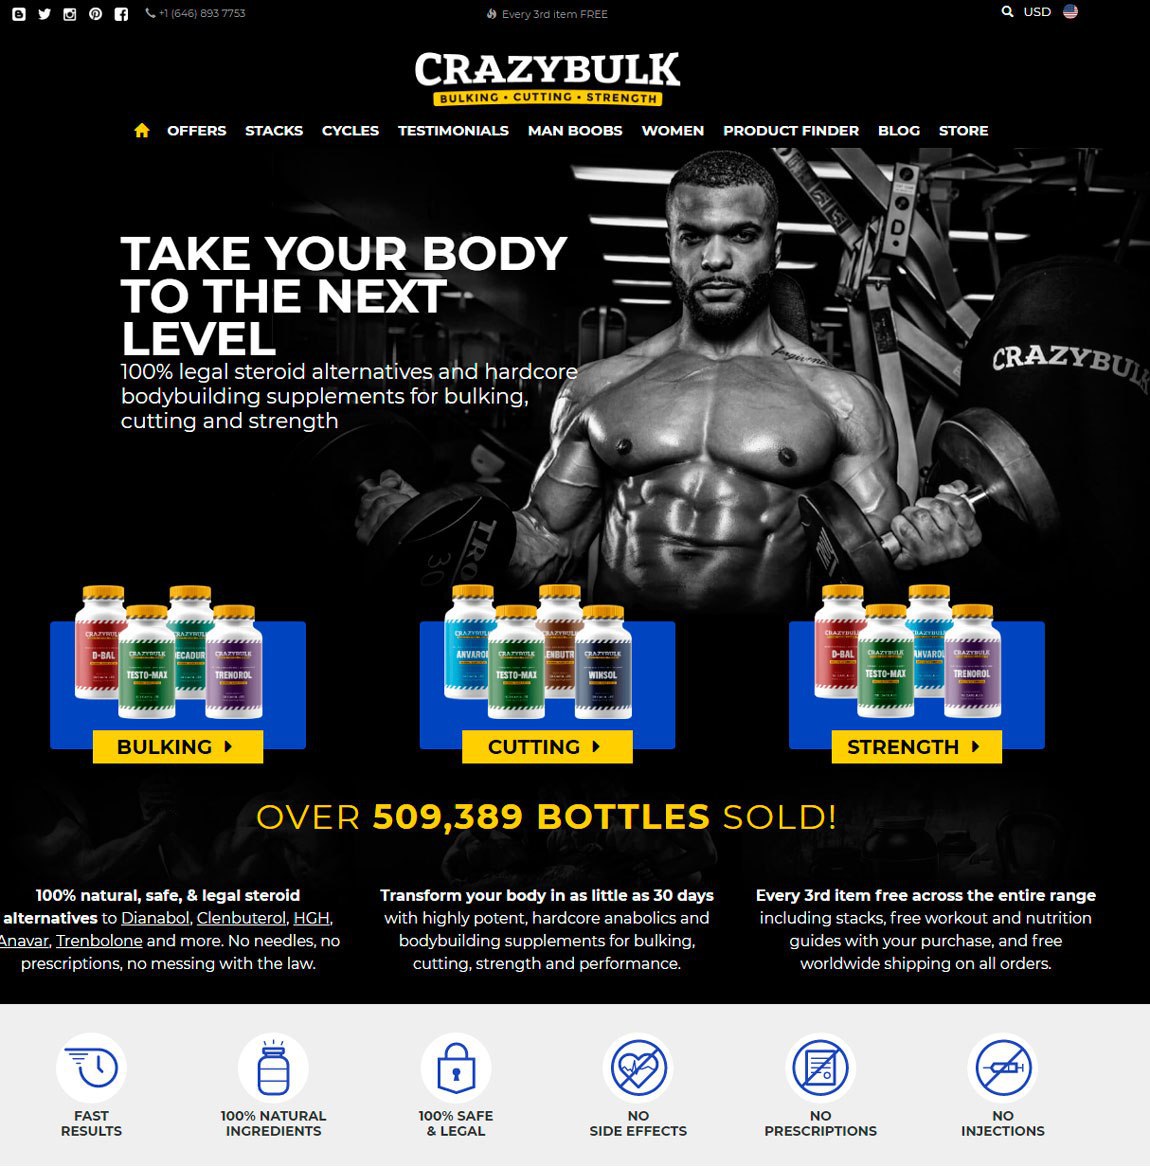 Intake of synthetic steroids to build muscle